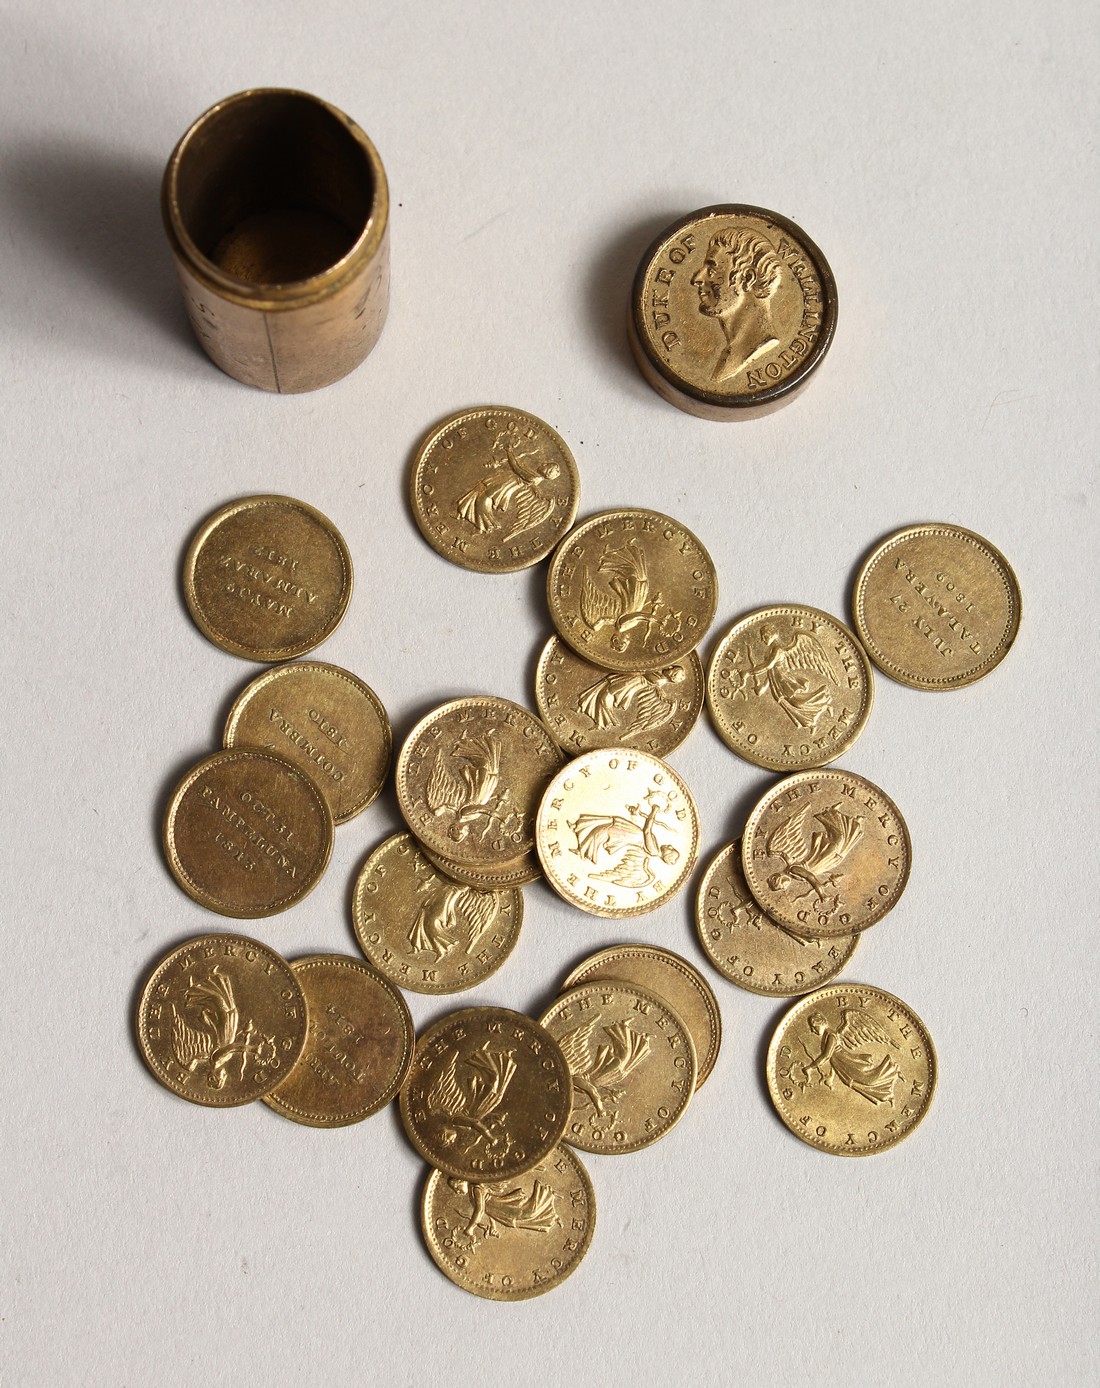 A SMALL TUBE OF COINS, BRITISH VICTORIUS PENINSULAR - Image 2 of 6